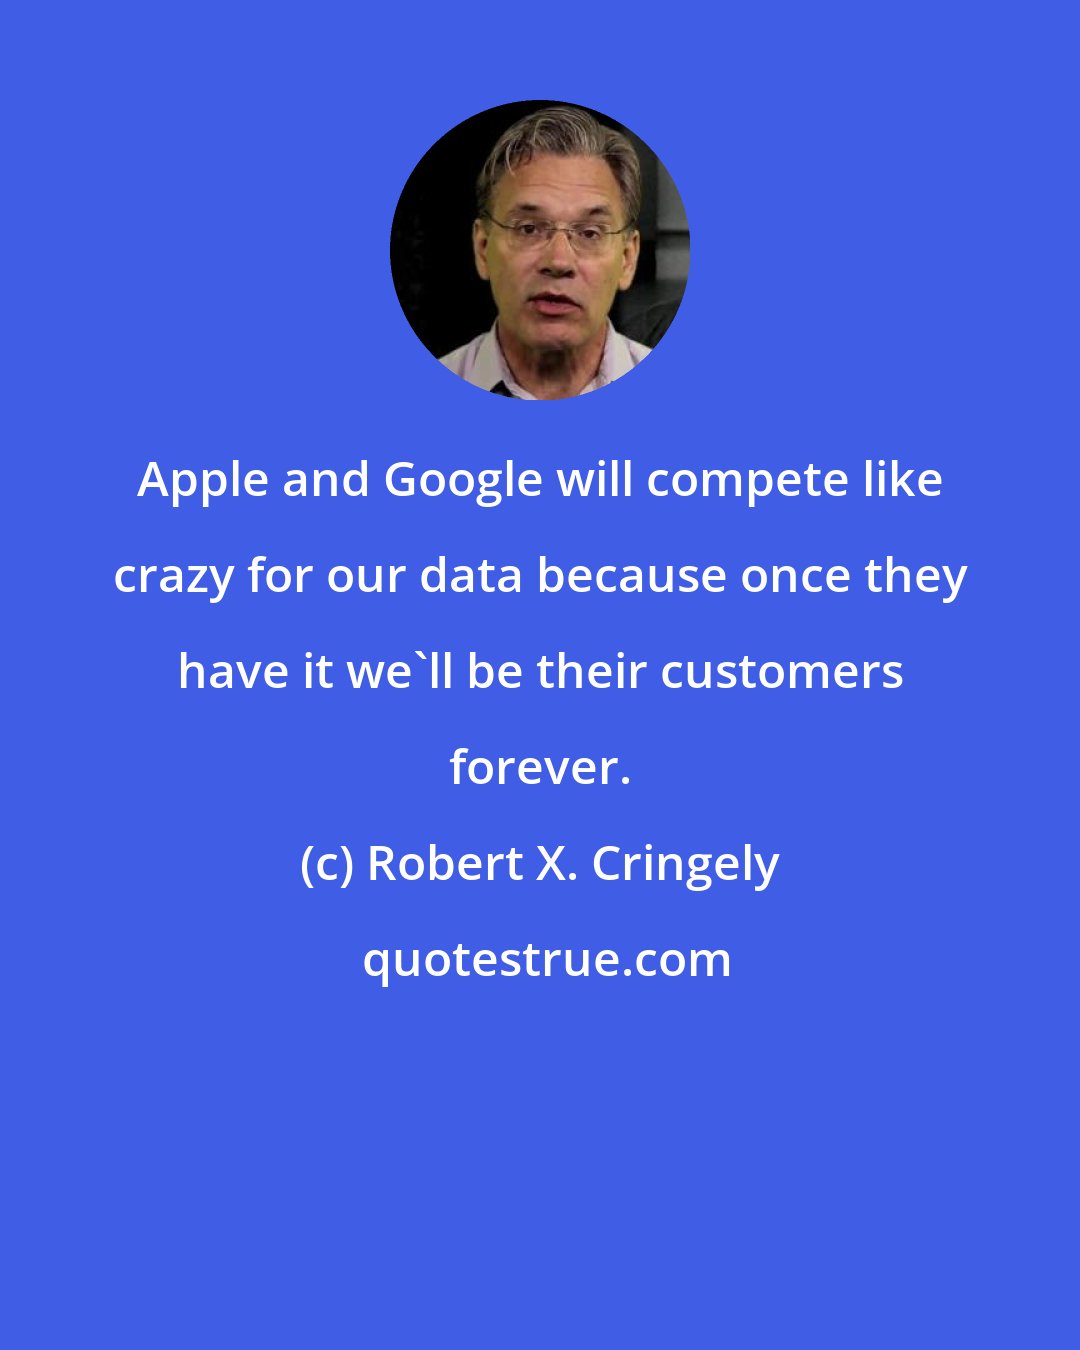 Robert X. Cringely: Apple and Google will compete like crazy for our data because once they have it we'll be their customers forever.